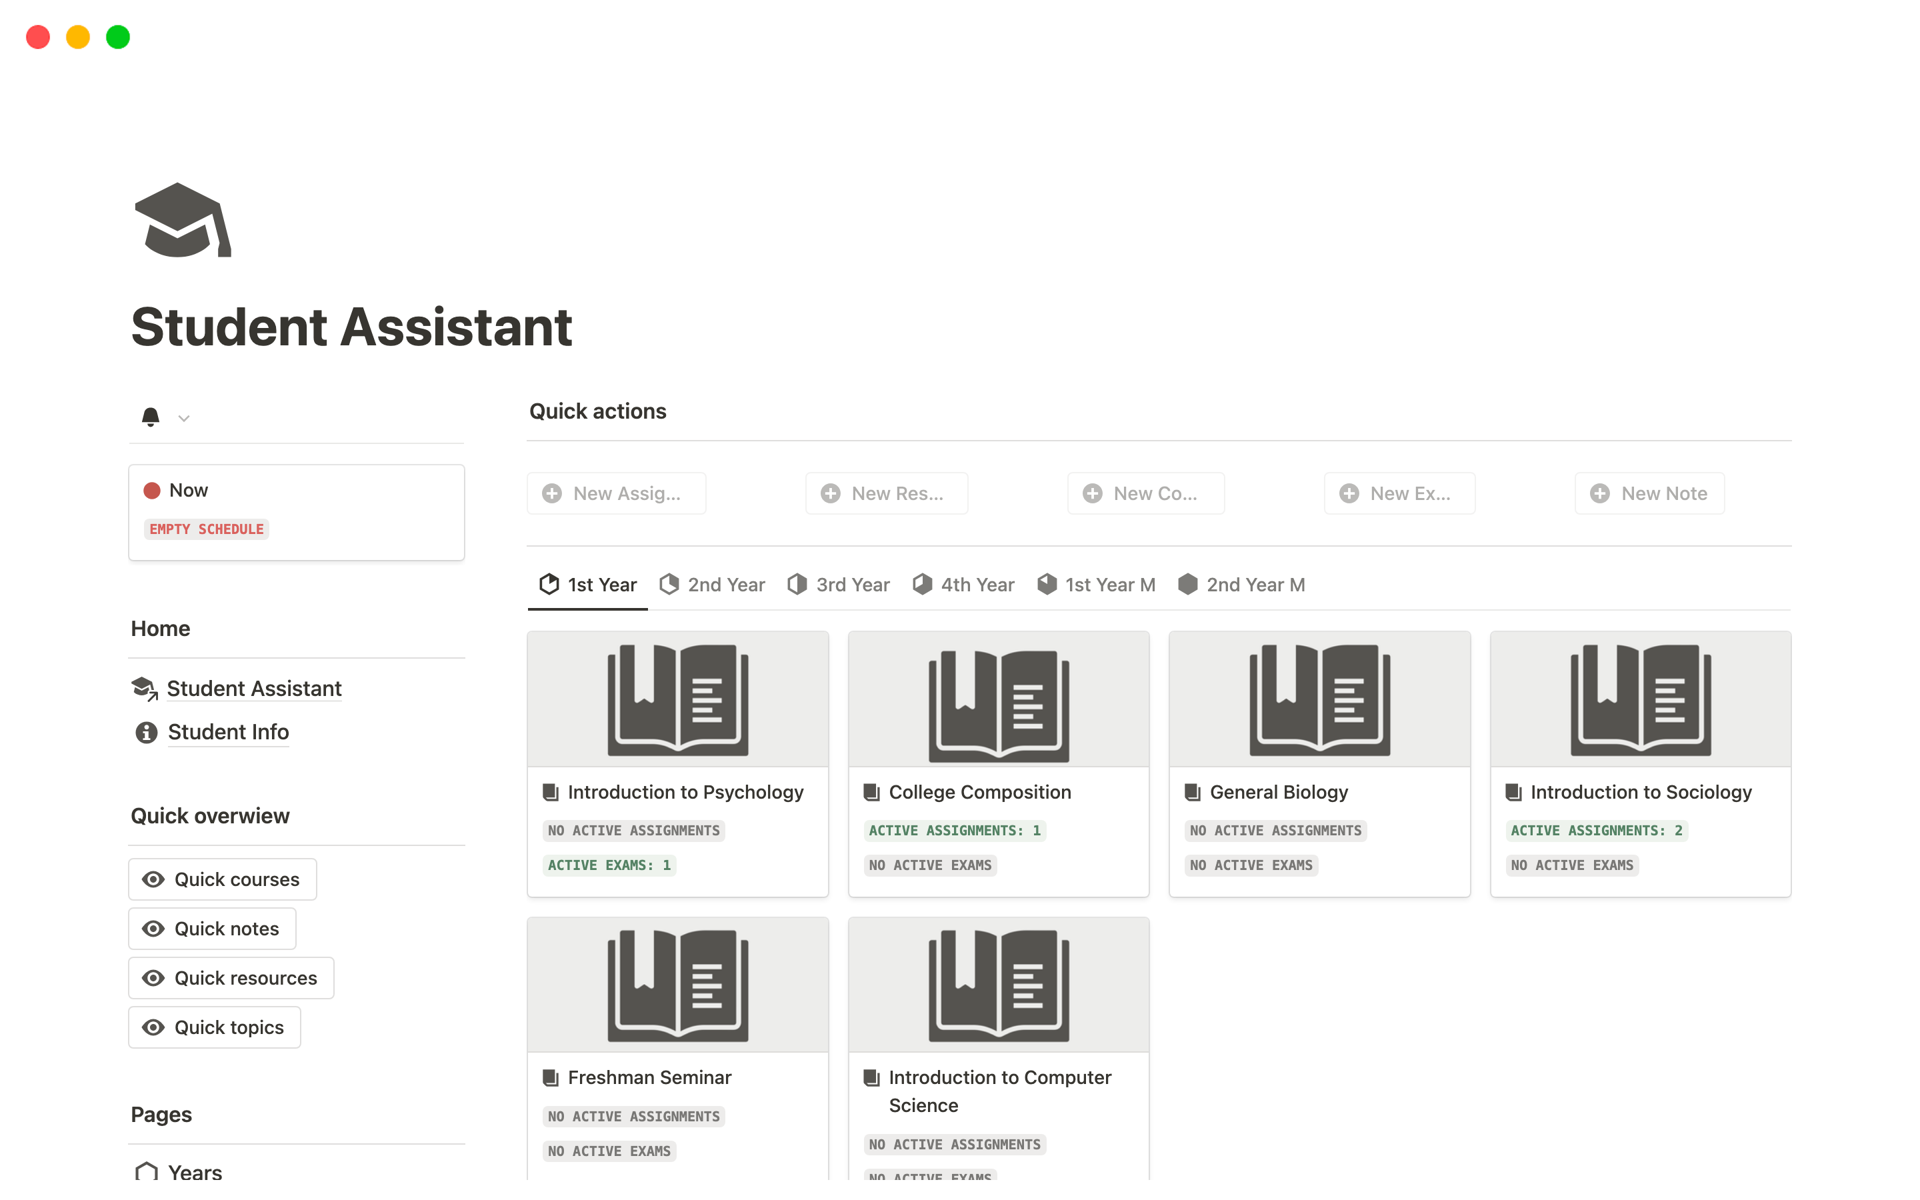 Student Assistant is a template where you can conveniently manage your student routine: assignments, exams, notes & resources, schedule, tuition tracking - all in one place.
